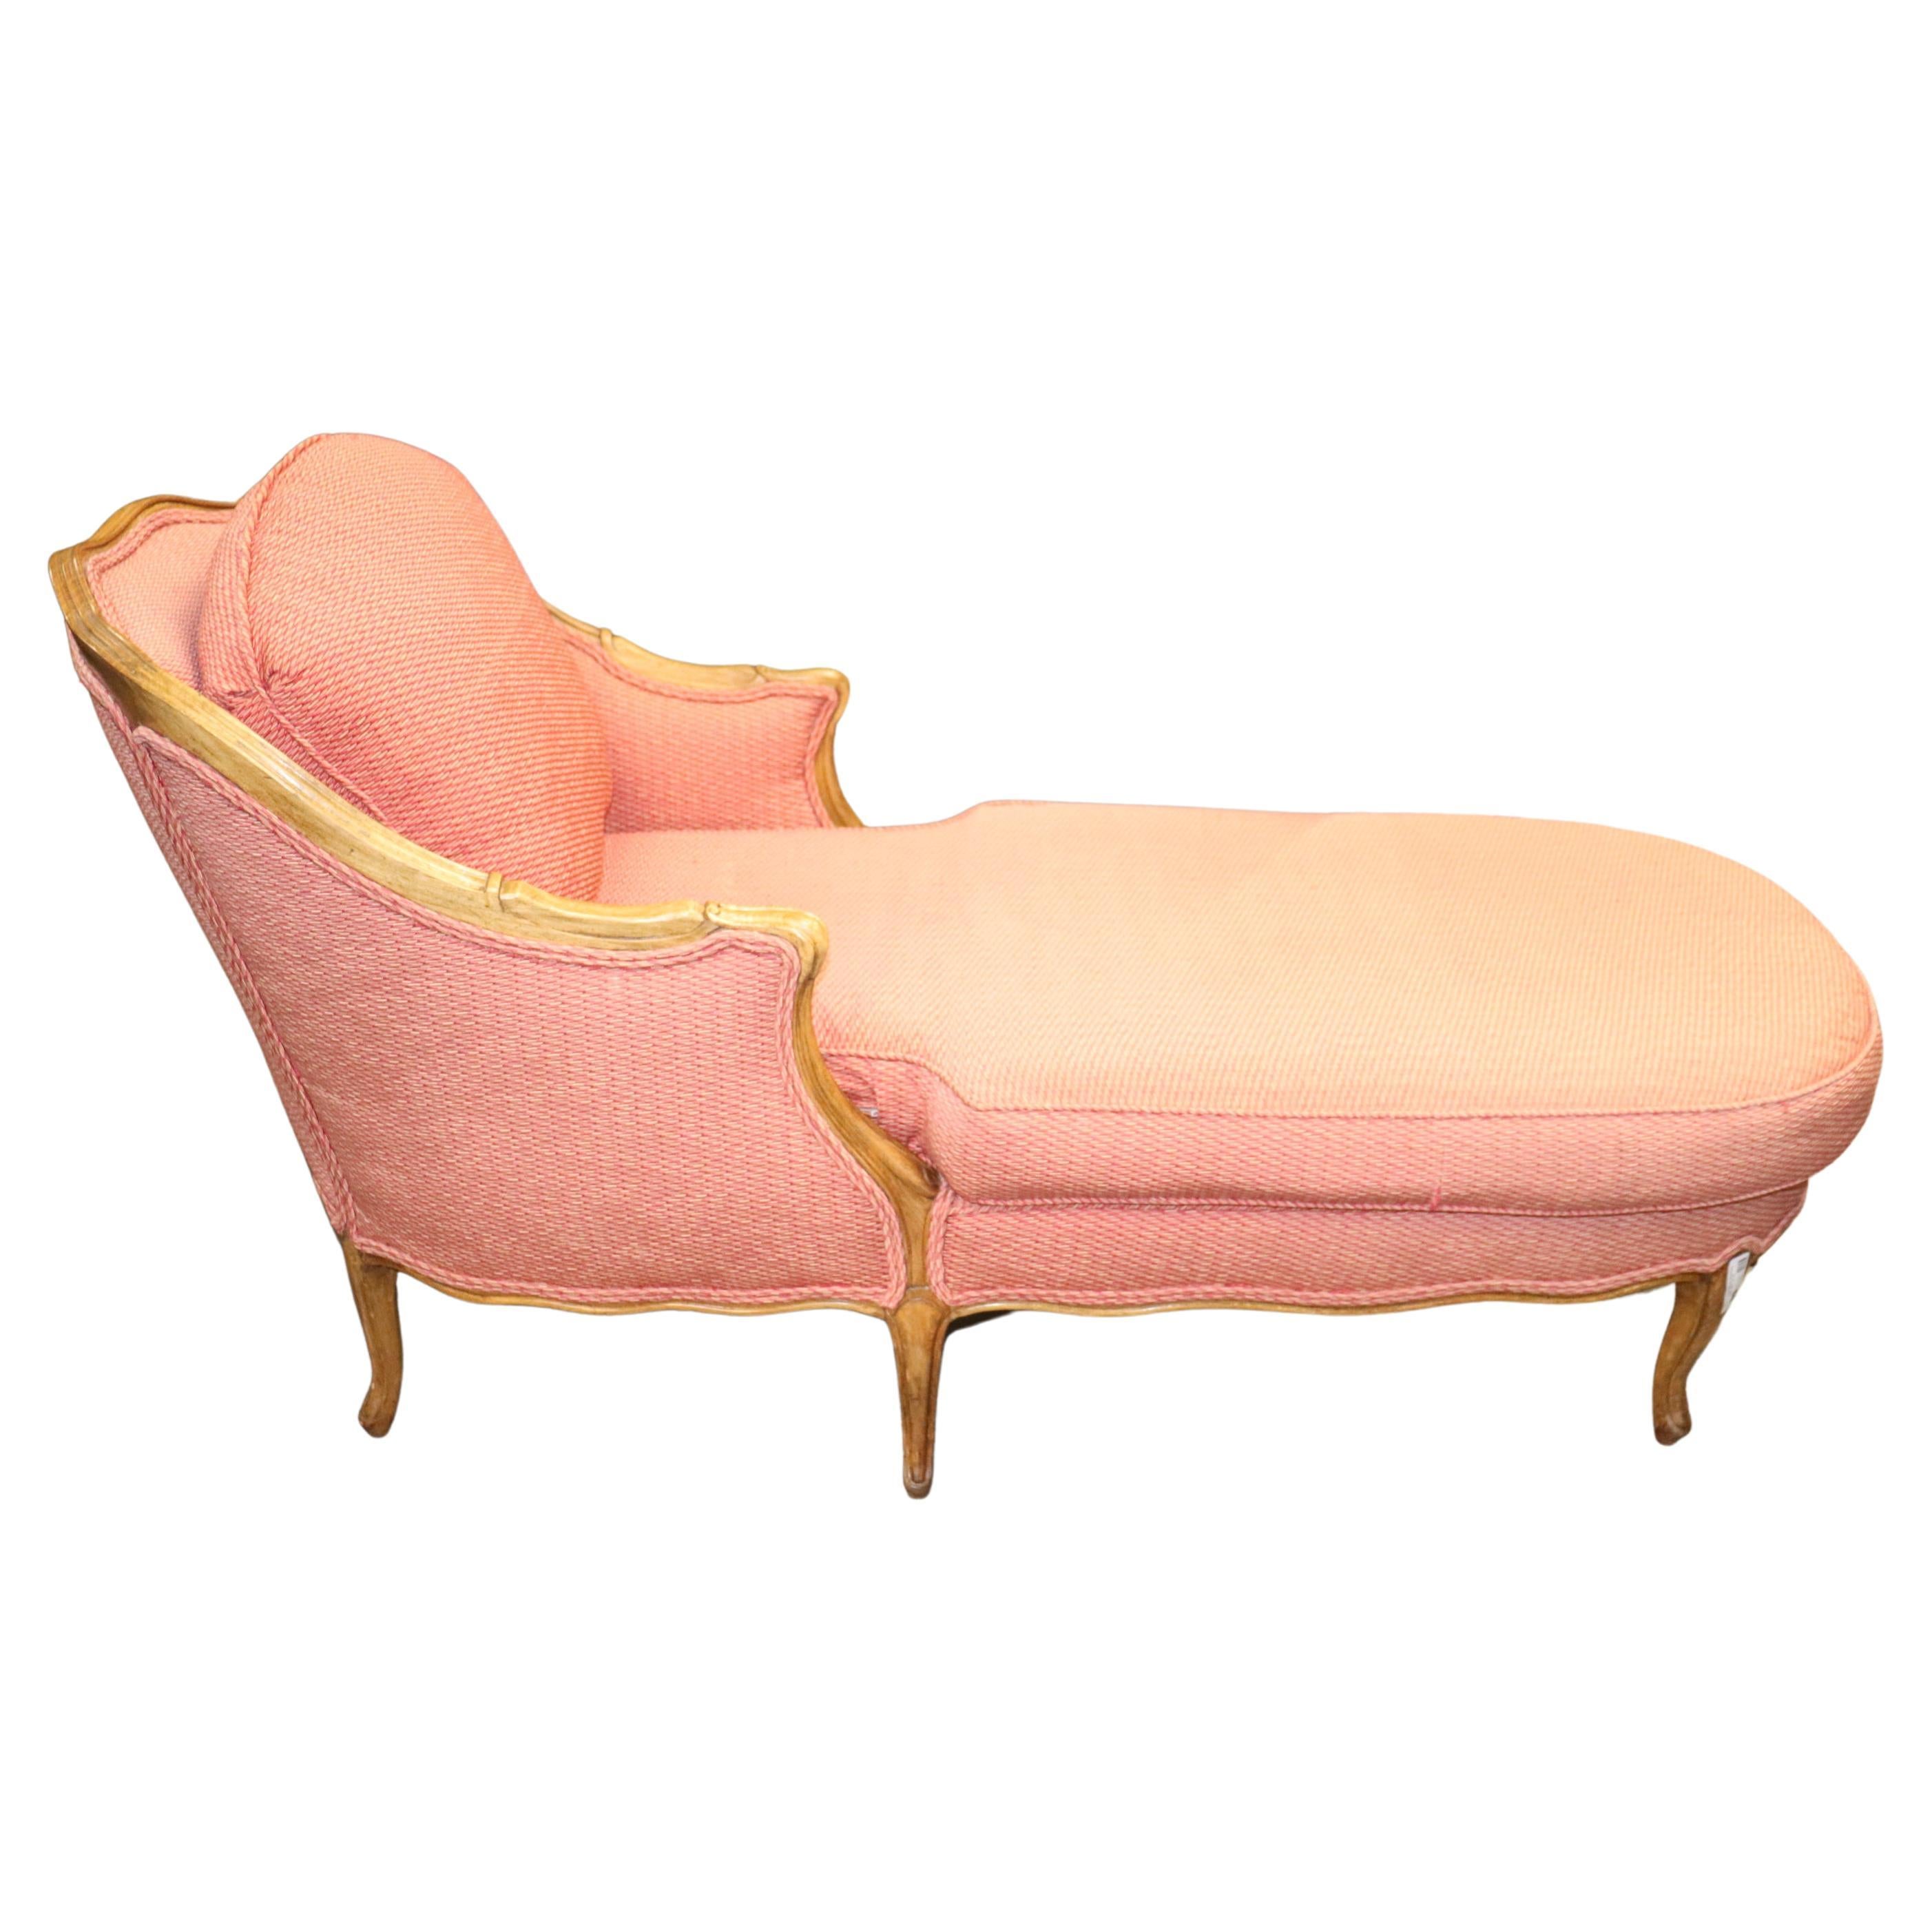 Unique French Carved Oak Blush Upholstered French Louis XV Style Daybed Chaise